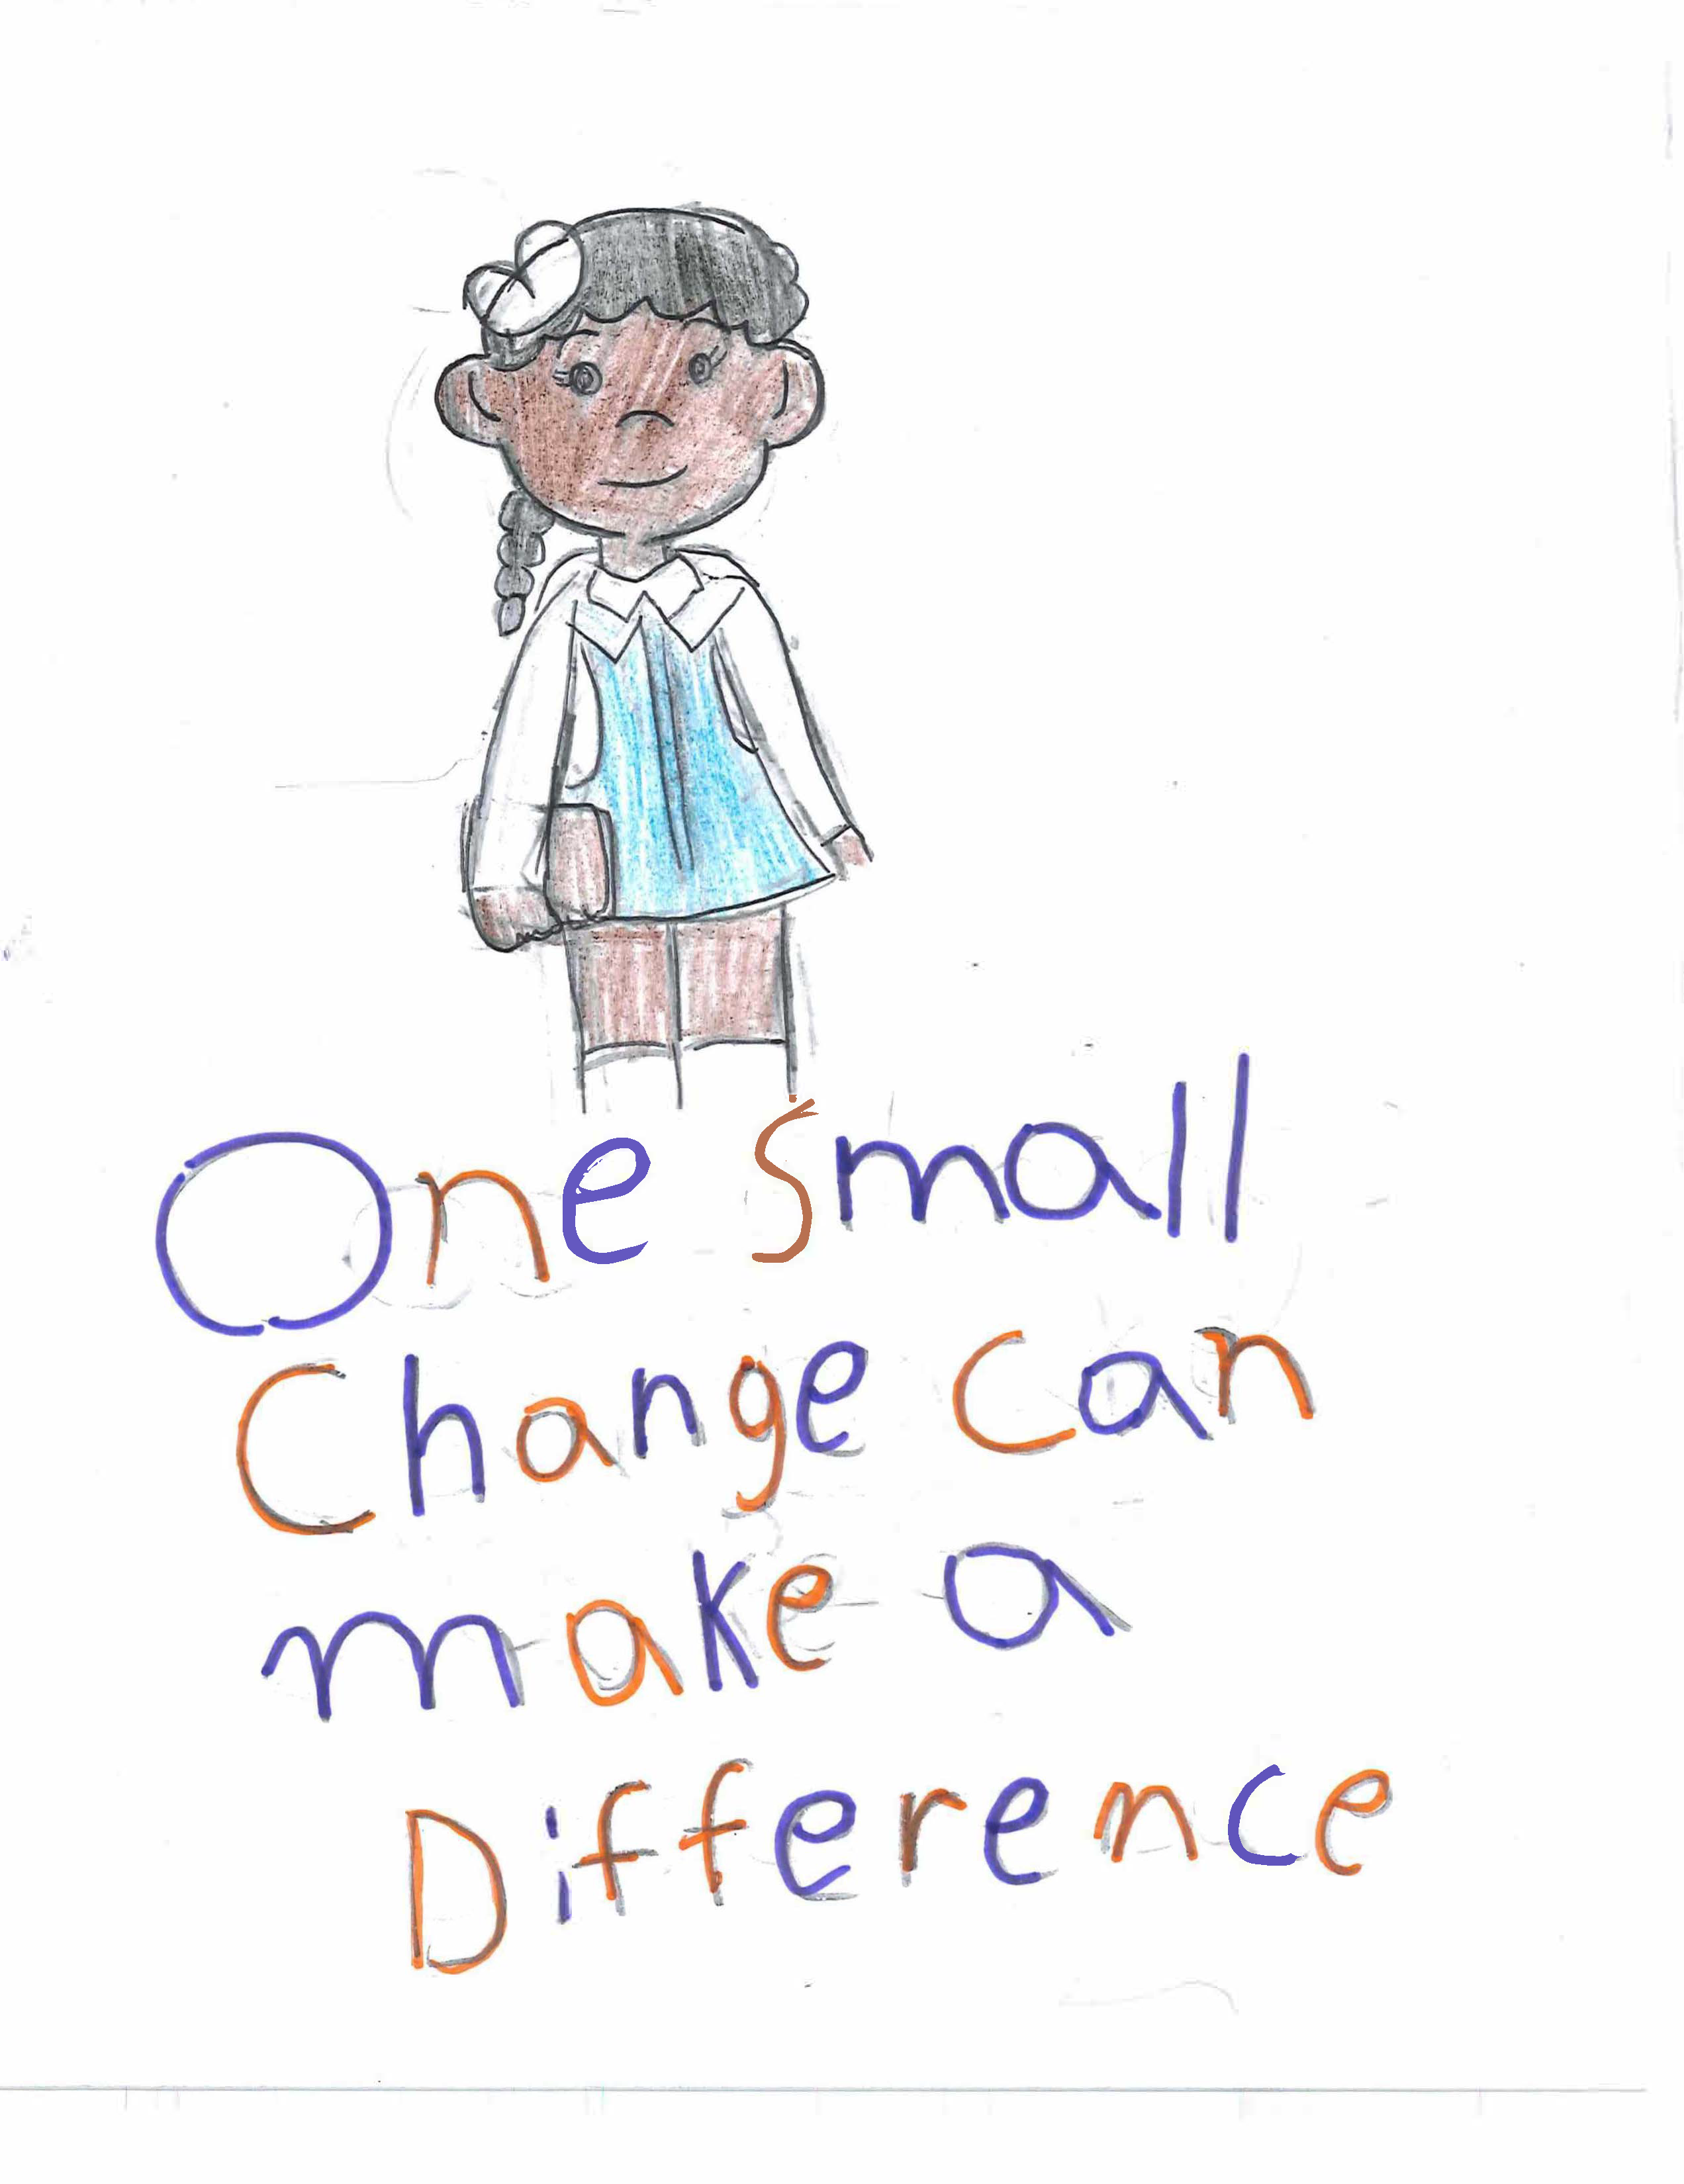 drawing of Ruby bridges with the text 